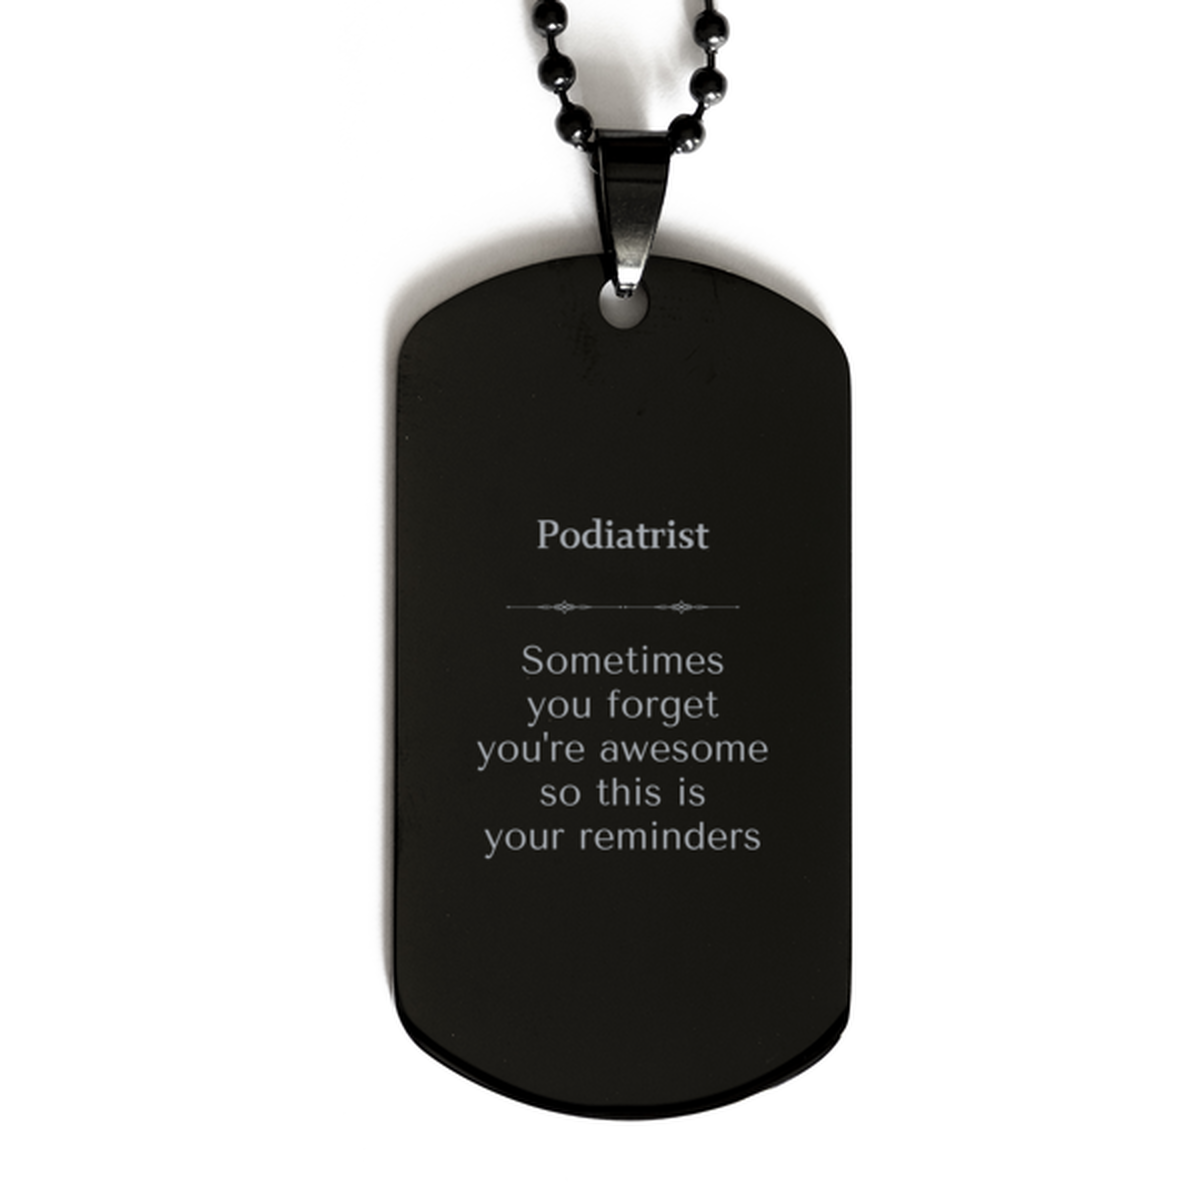 Sentimental Podiatrist Black Dog Tag, Podiatrist Sometimes you forget you're awesome so this is your reminders, Graduation Christmas Birthday Gifts for Podiatrist, Men, Women, Coworkers